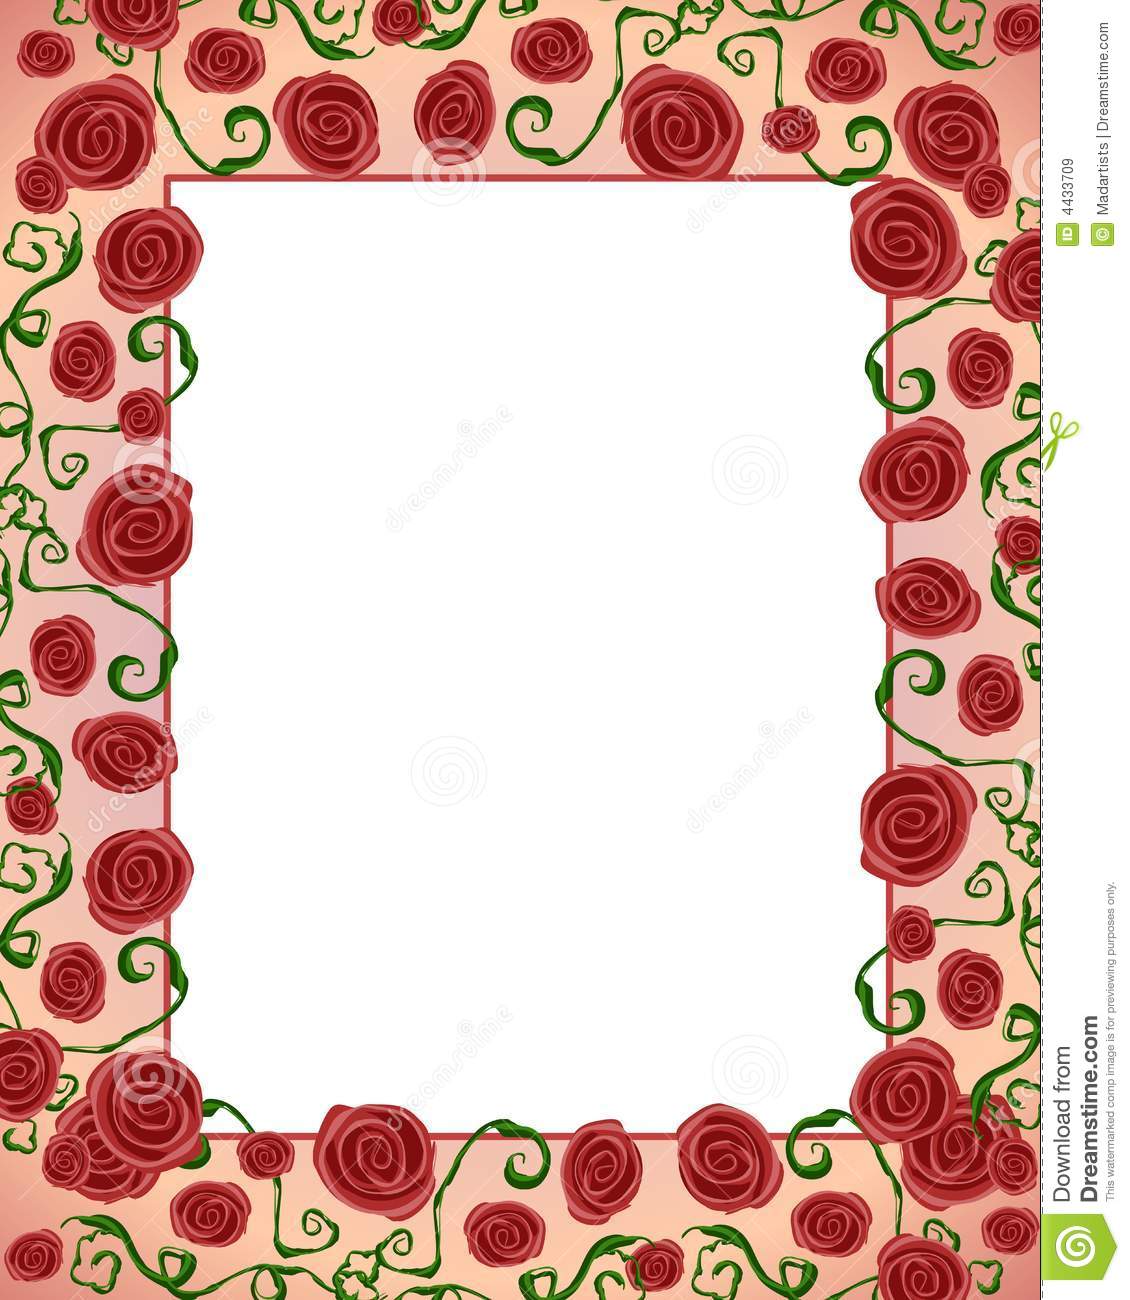 An Illustration Featuring An Artsy Or Folksy Rose Border Or Frame In